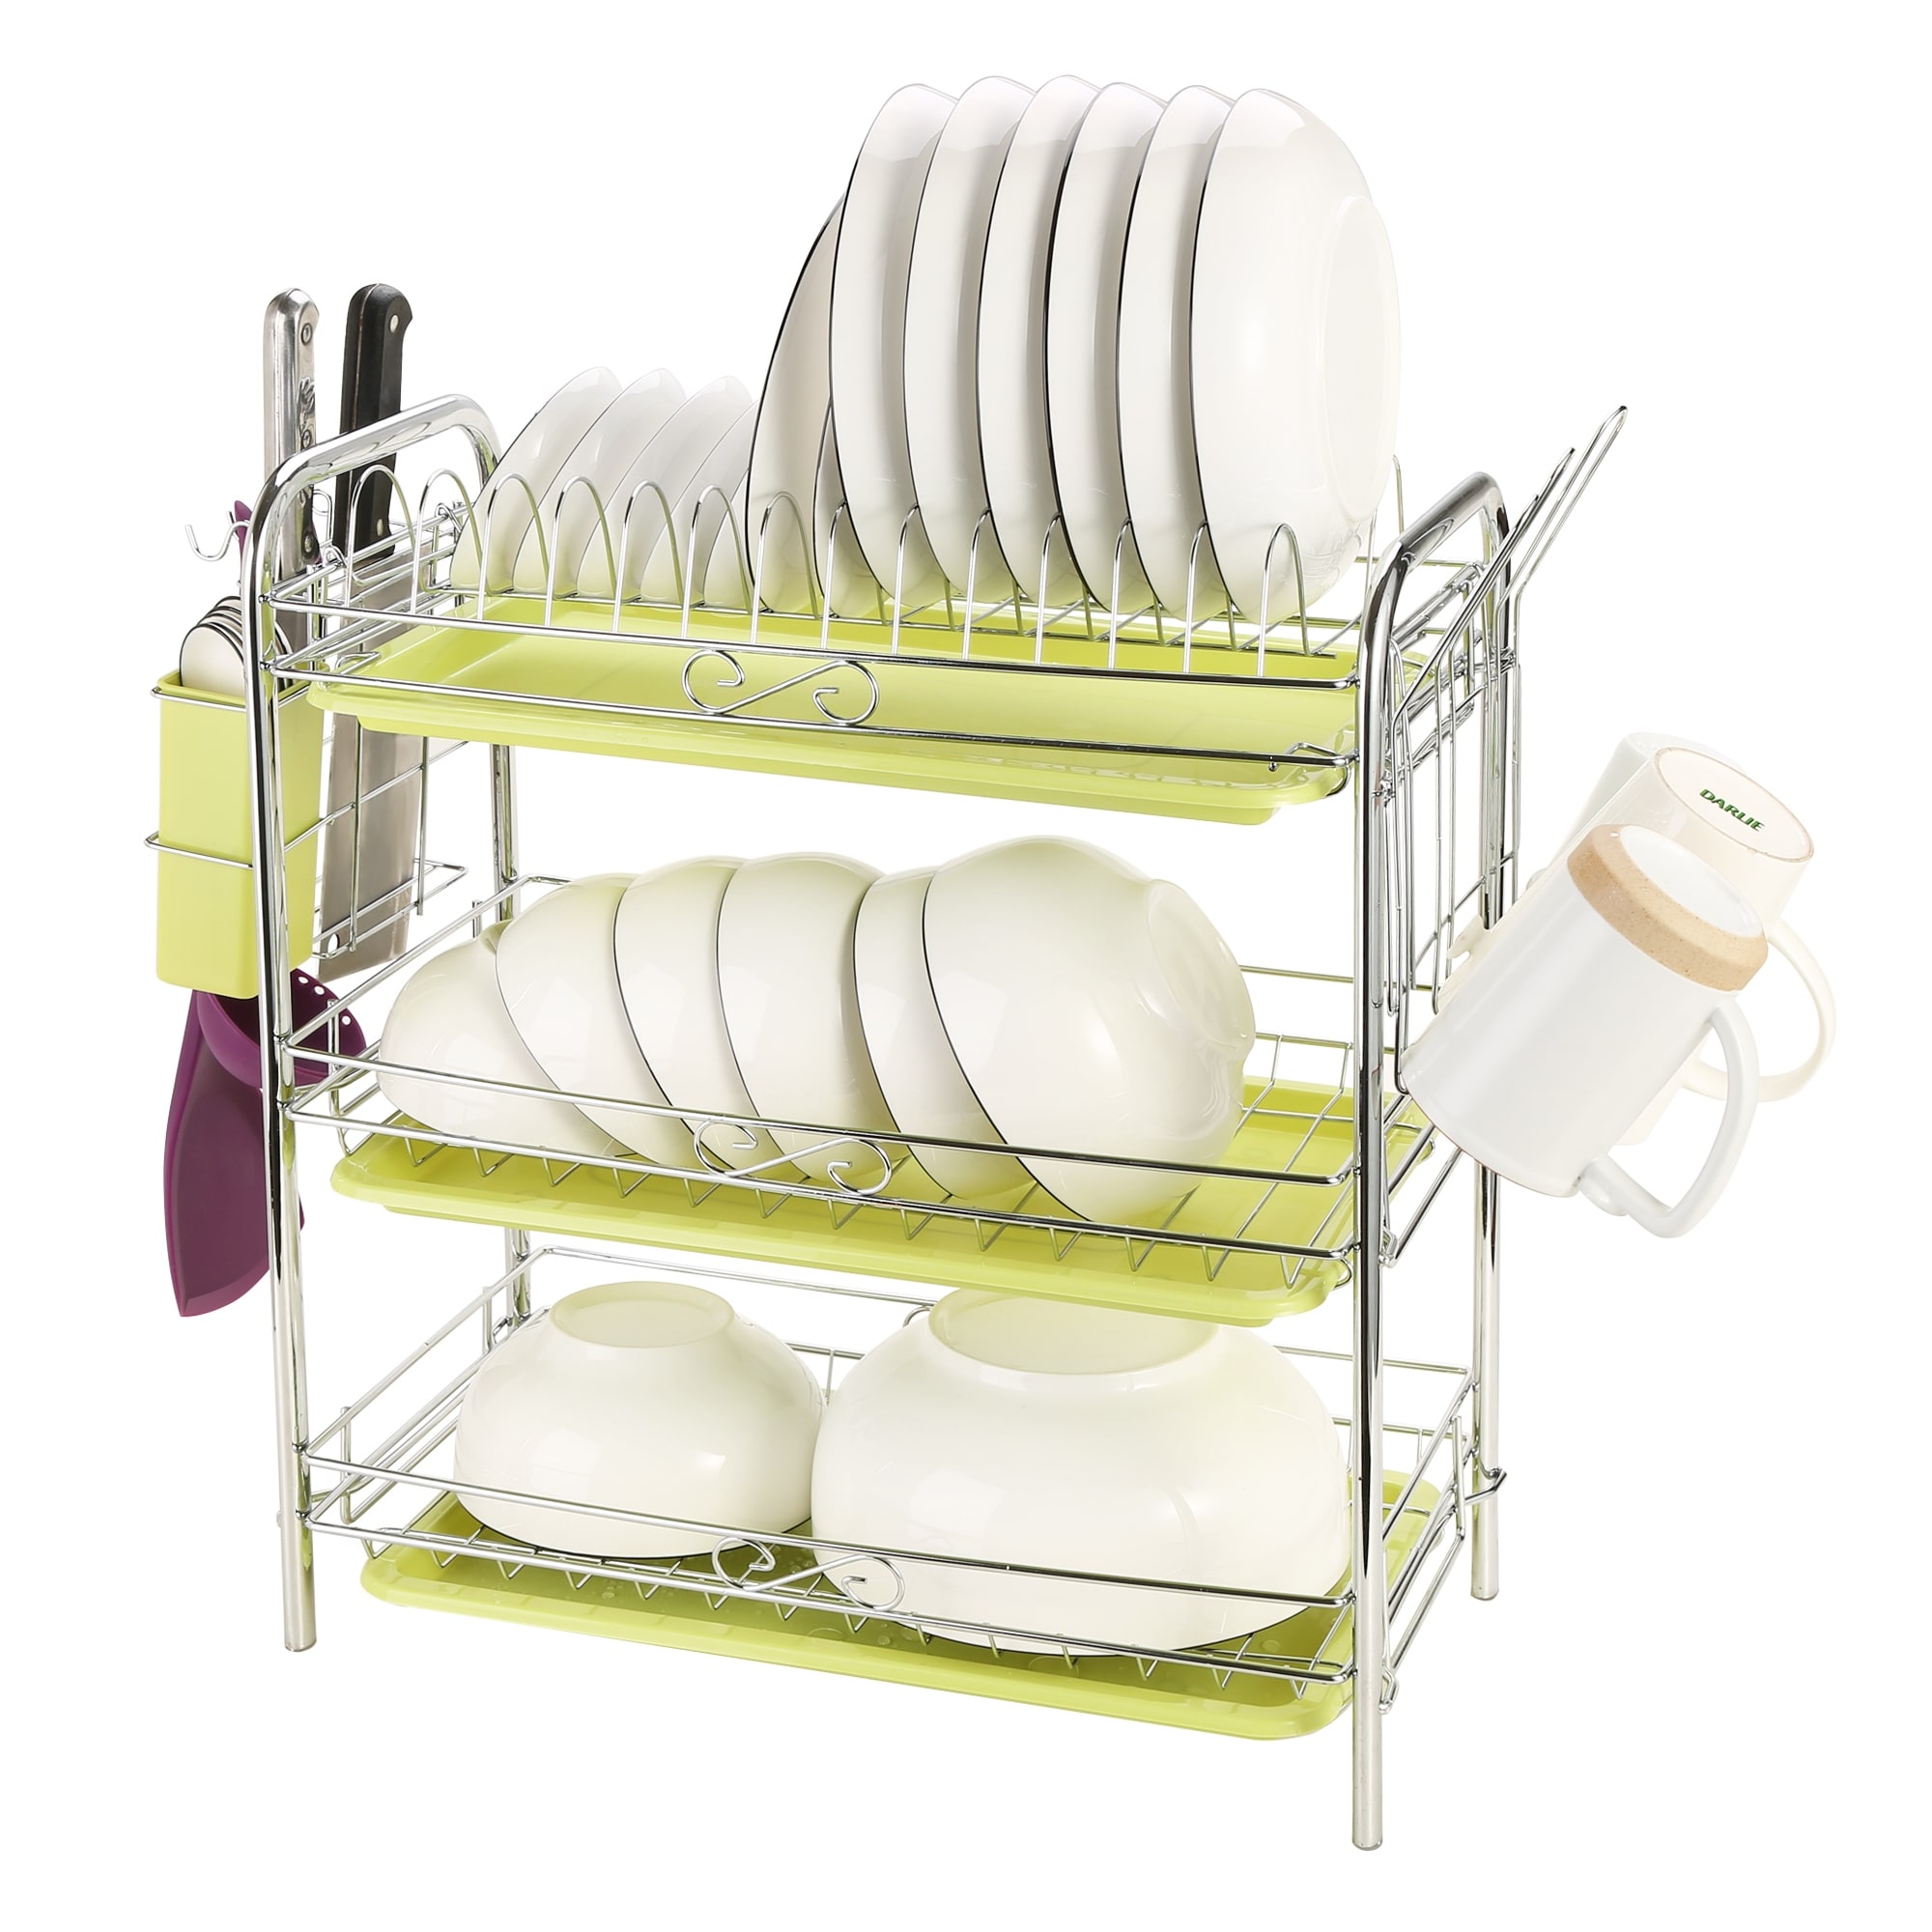 3 Tiers Dish Rack For Kitchen Cabinet With Cutlery Cup 2204 X 905 X 1850 In 76 X 96 Overstock 31483976